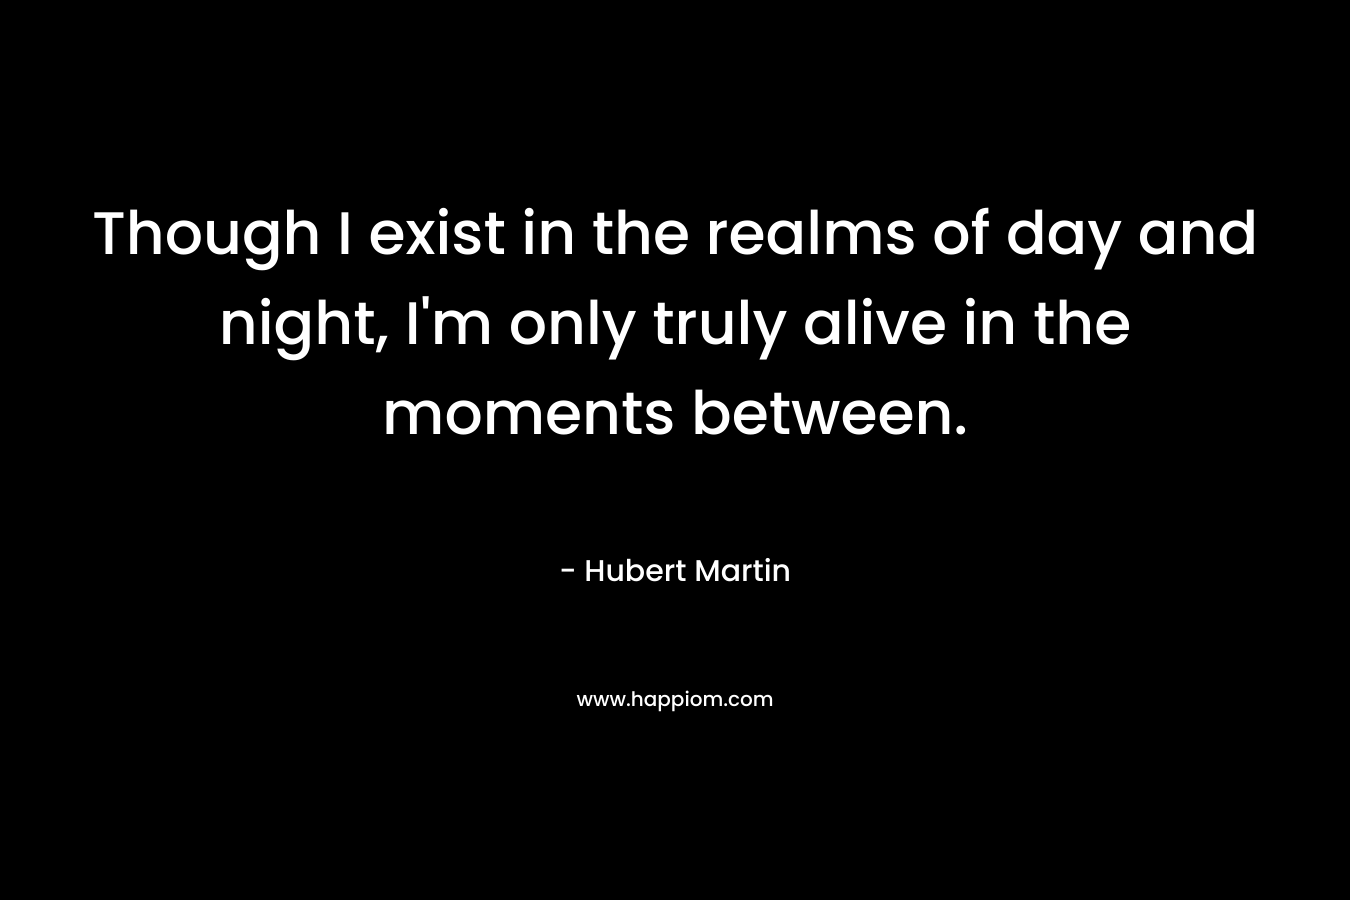 Though I exist in the realms of day and night, I’m only truly alive in the moments between. – Hubert Martin